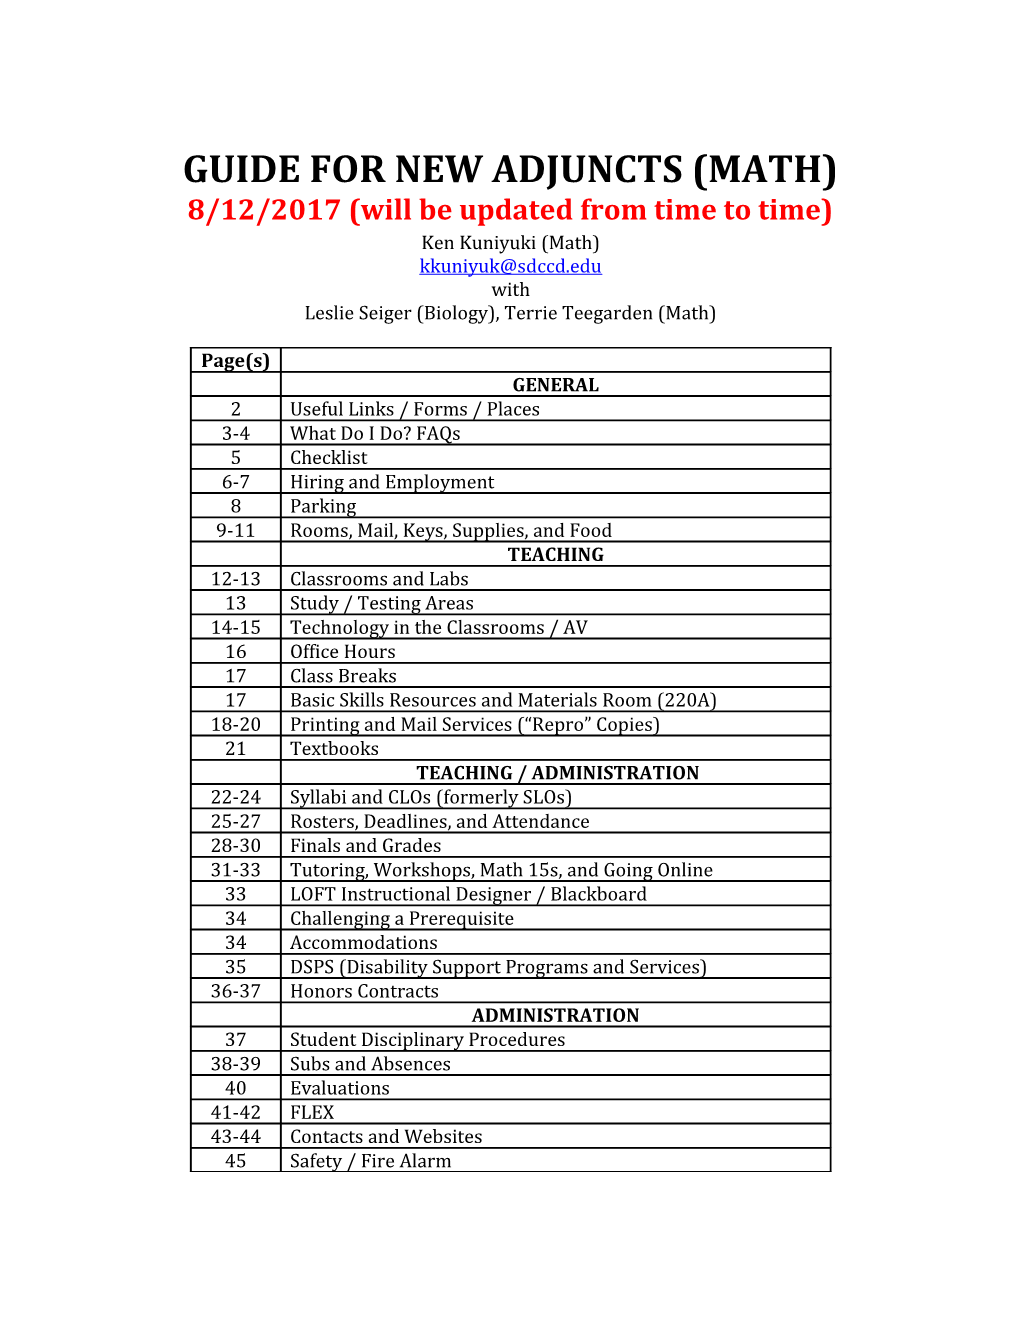 Guide for New Adjuncts (Math)